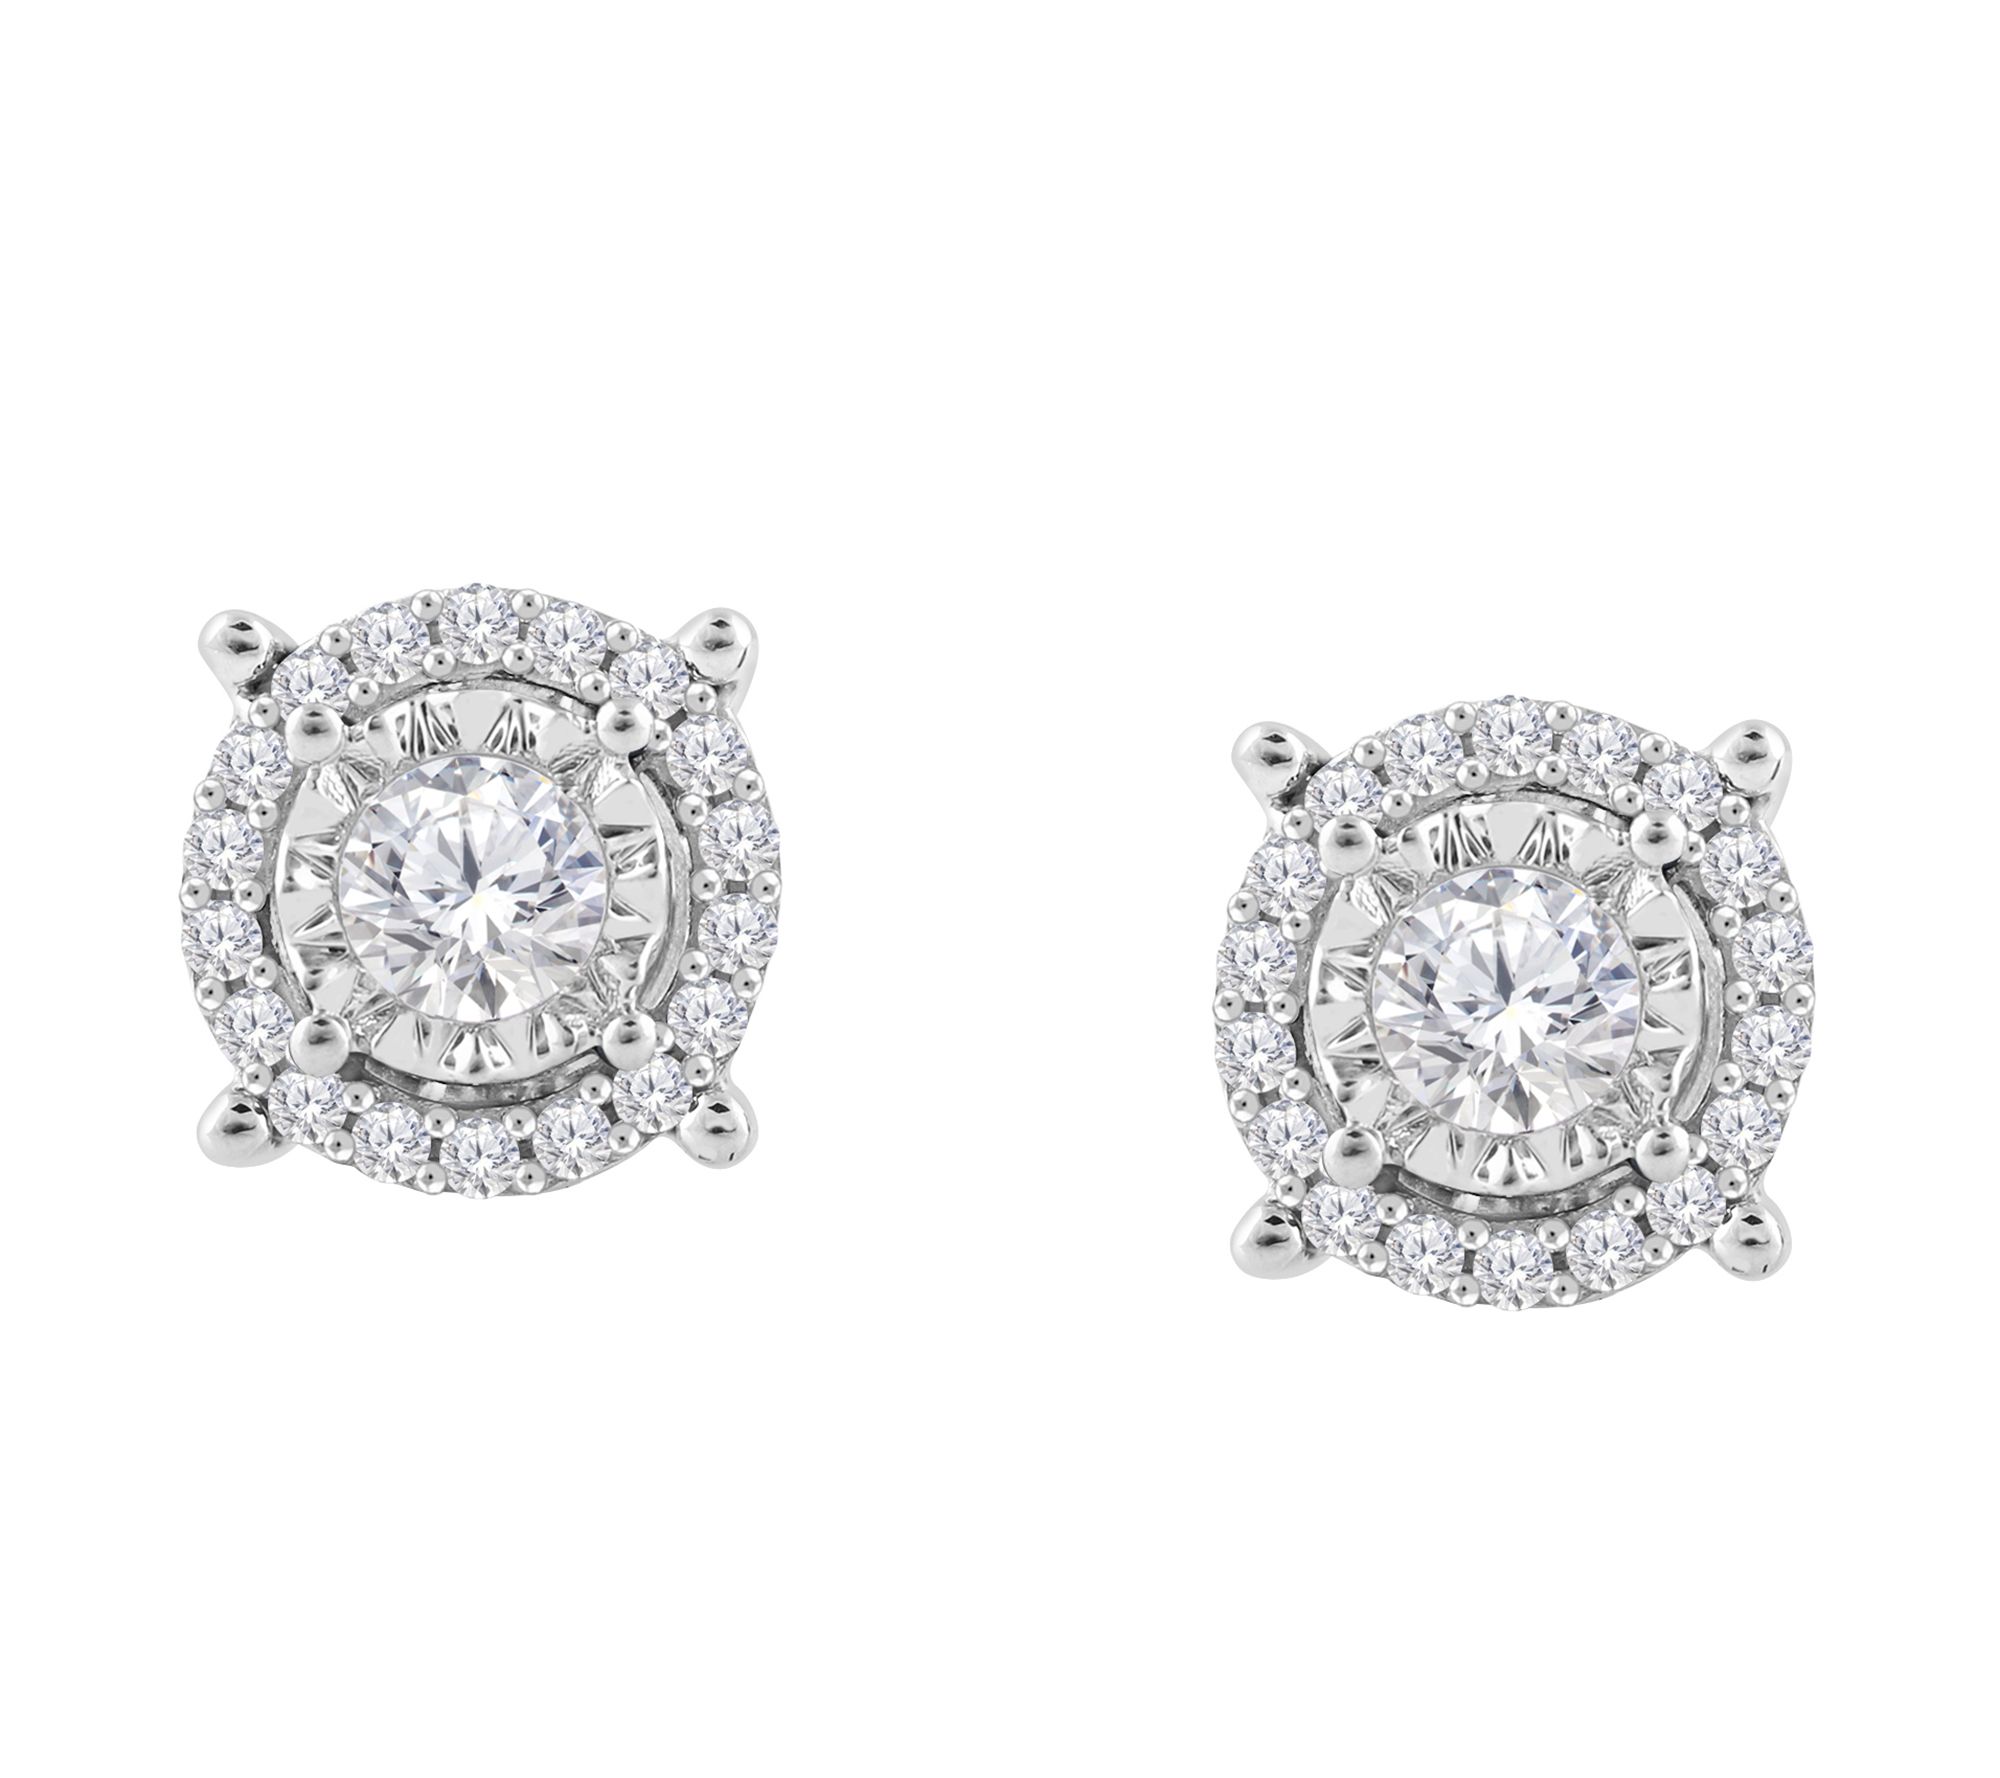 Affinity 1.00 cttw Diamond Halo Stud Earrings,Sterling Silver - QVC.com